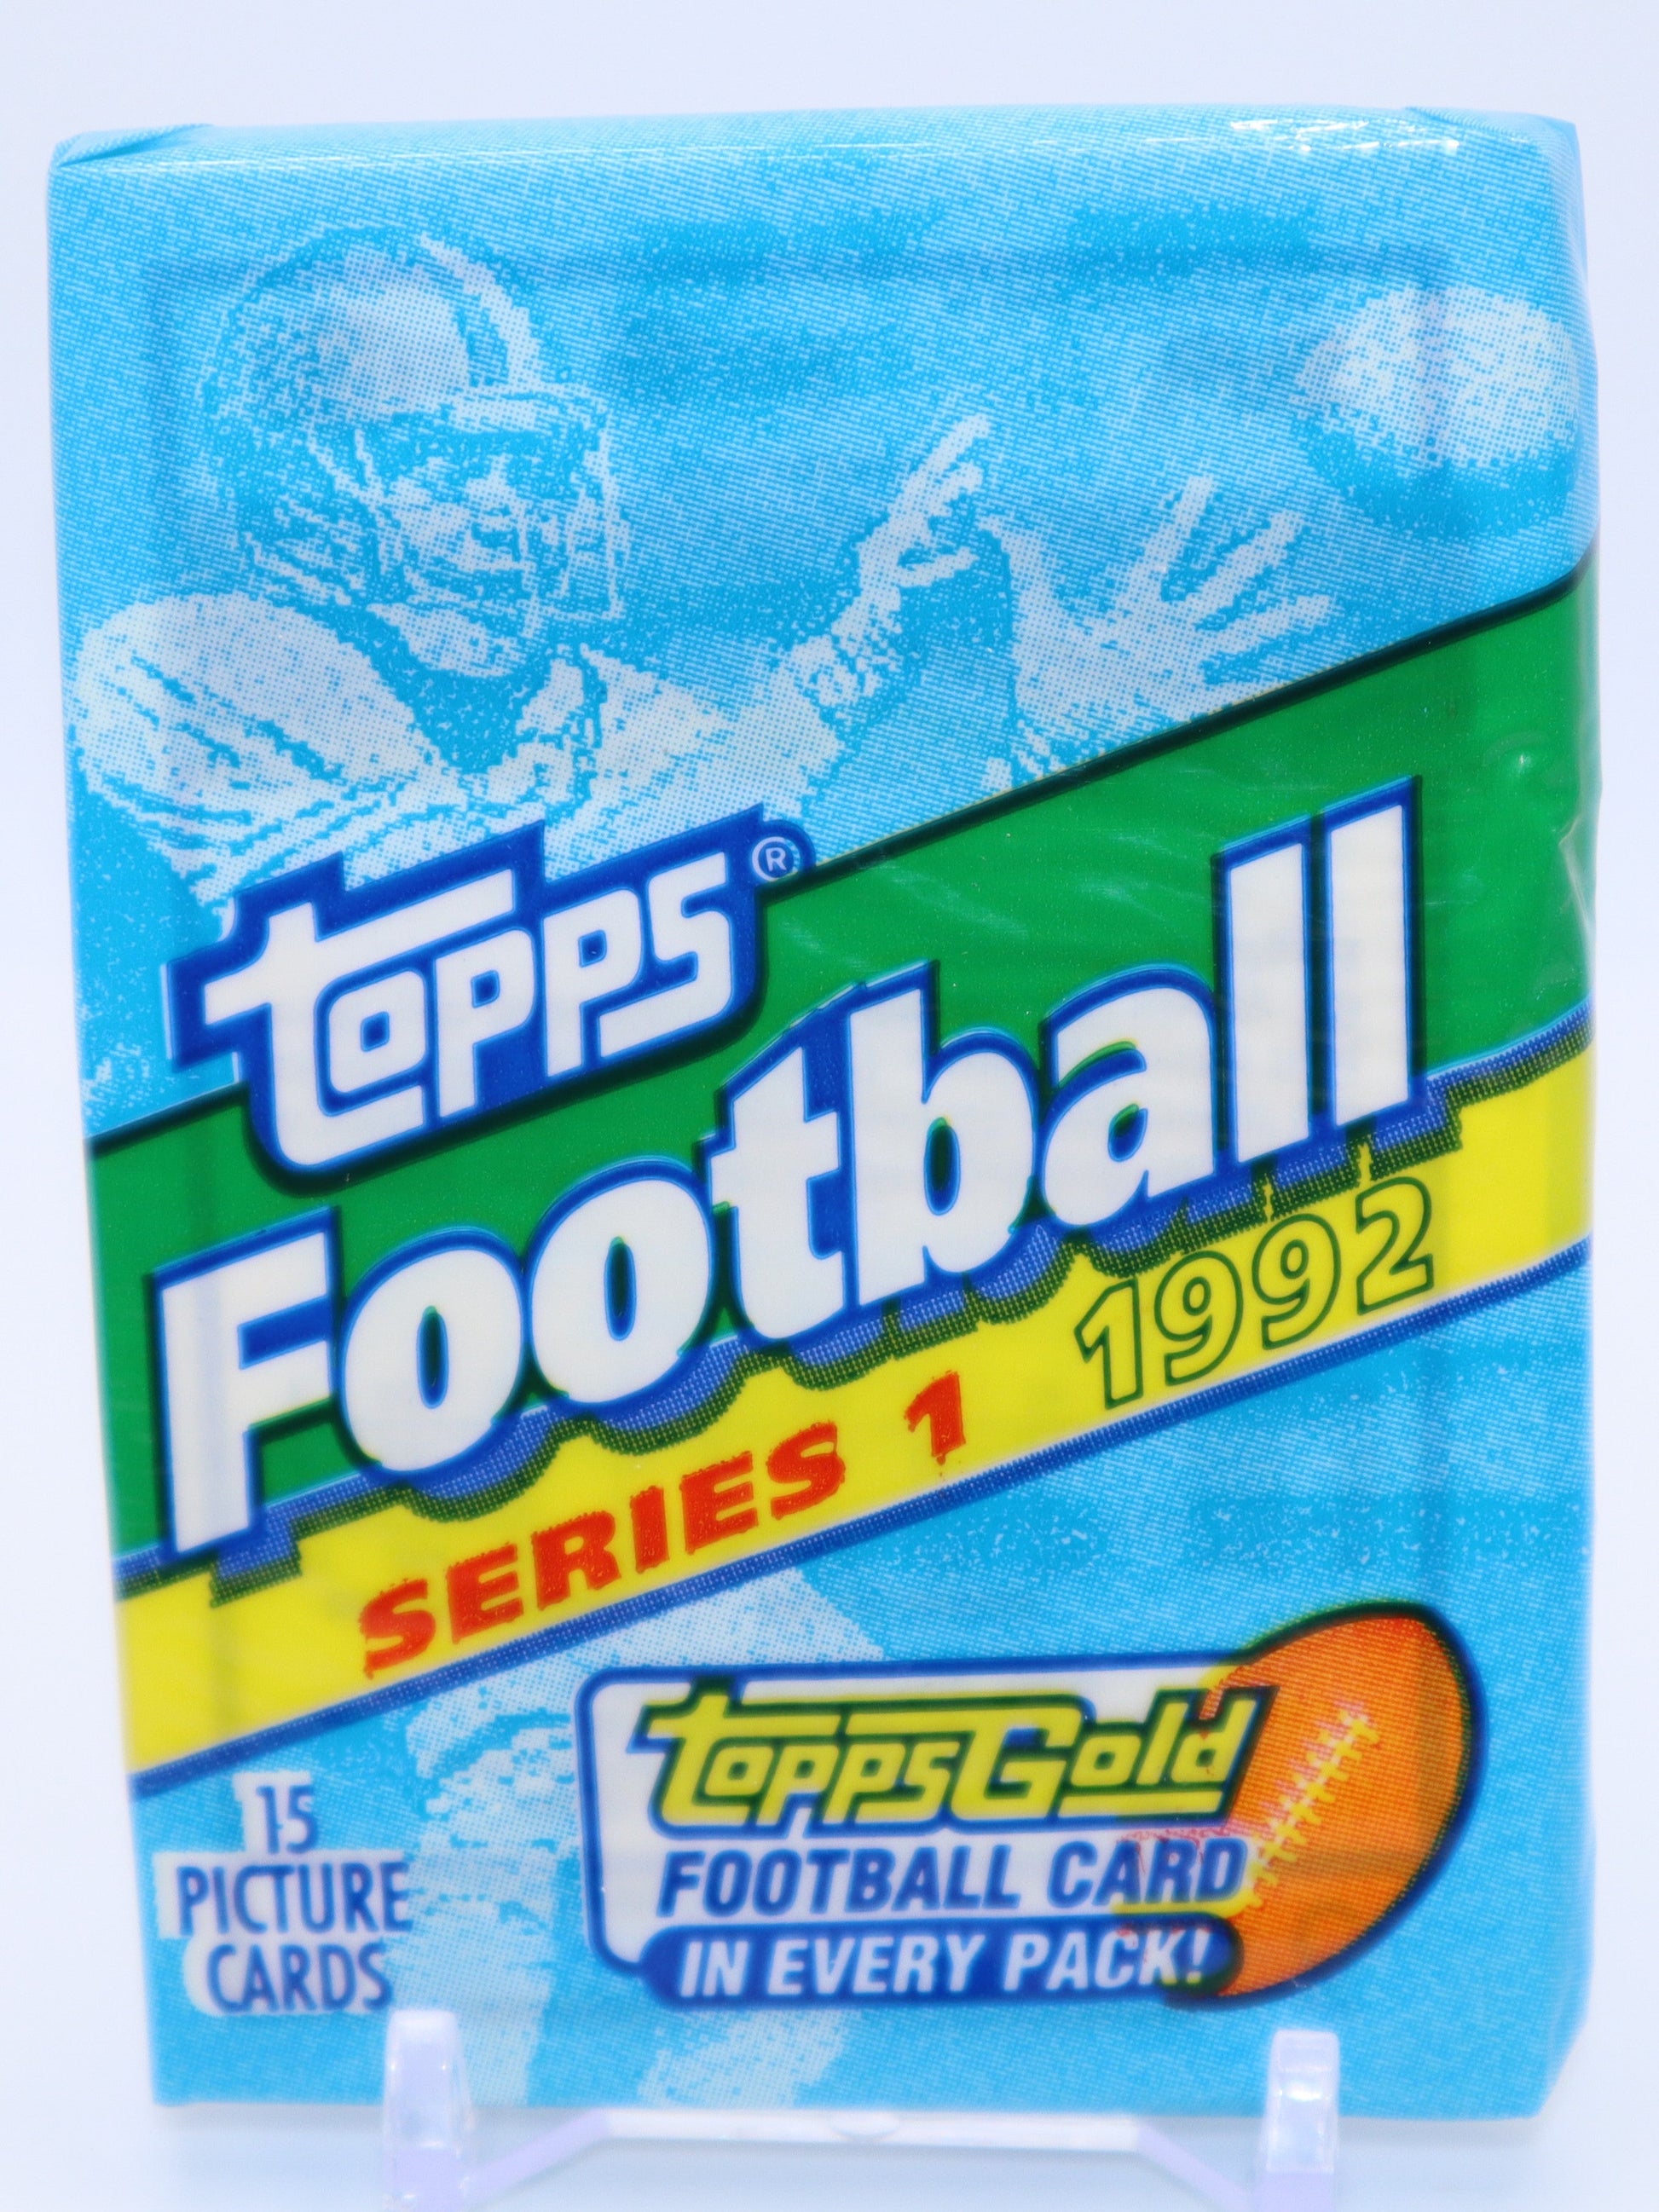 1992 Topps Series 1 NFL Football Cards Wax Pack - Collectibles